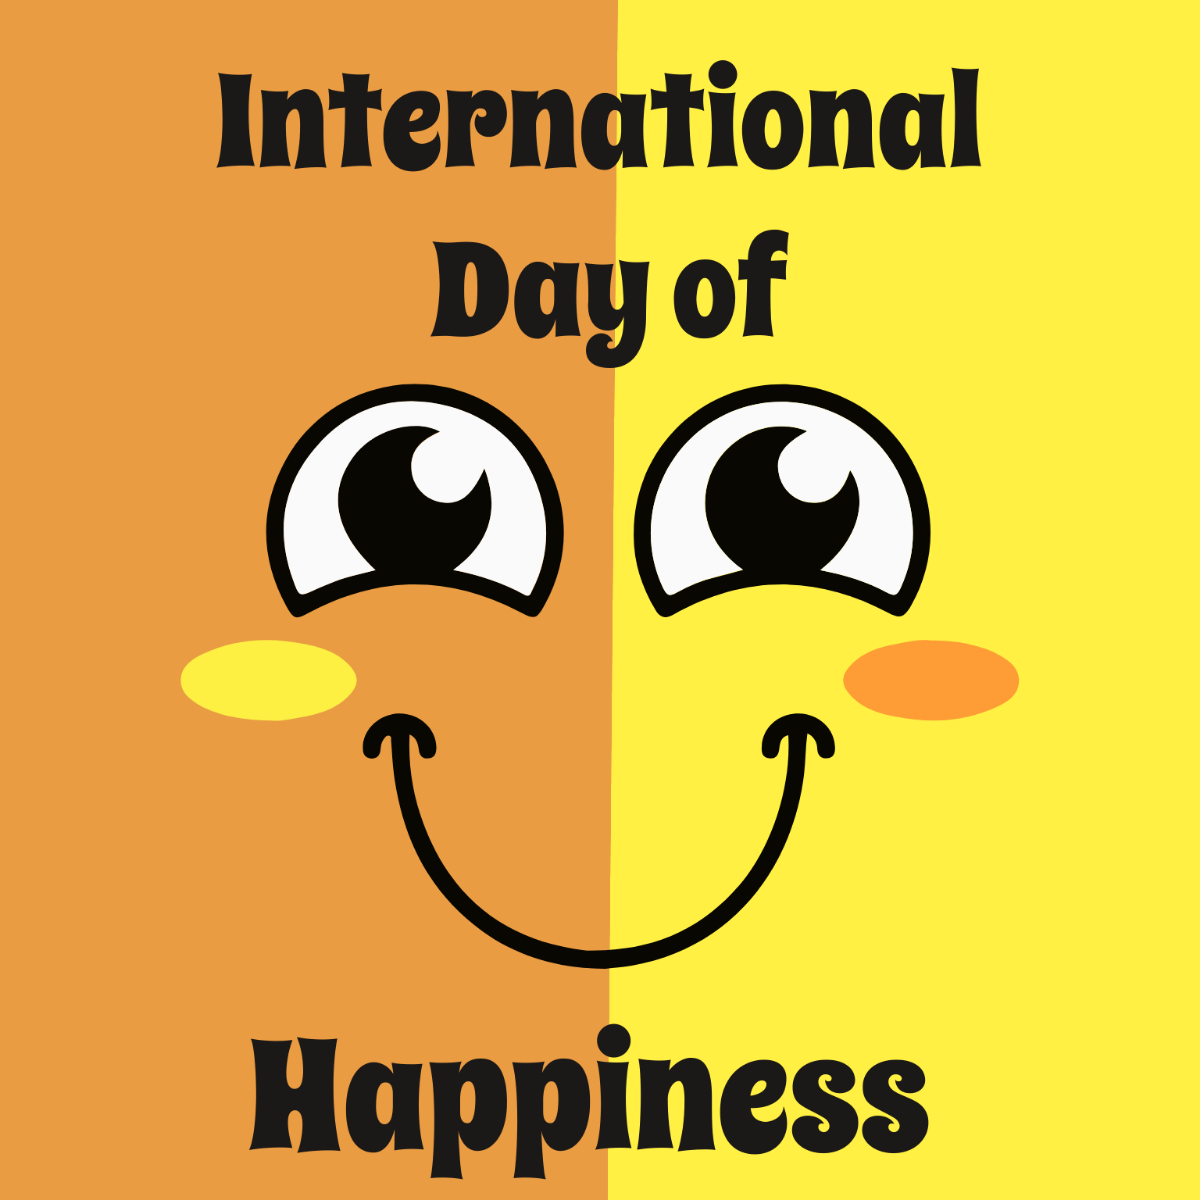 Free International Day of Happiness Illustration Template